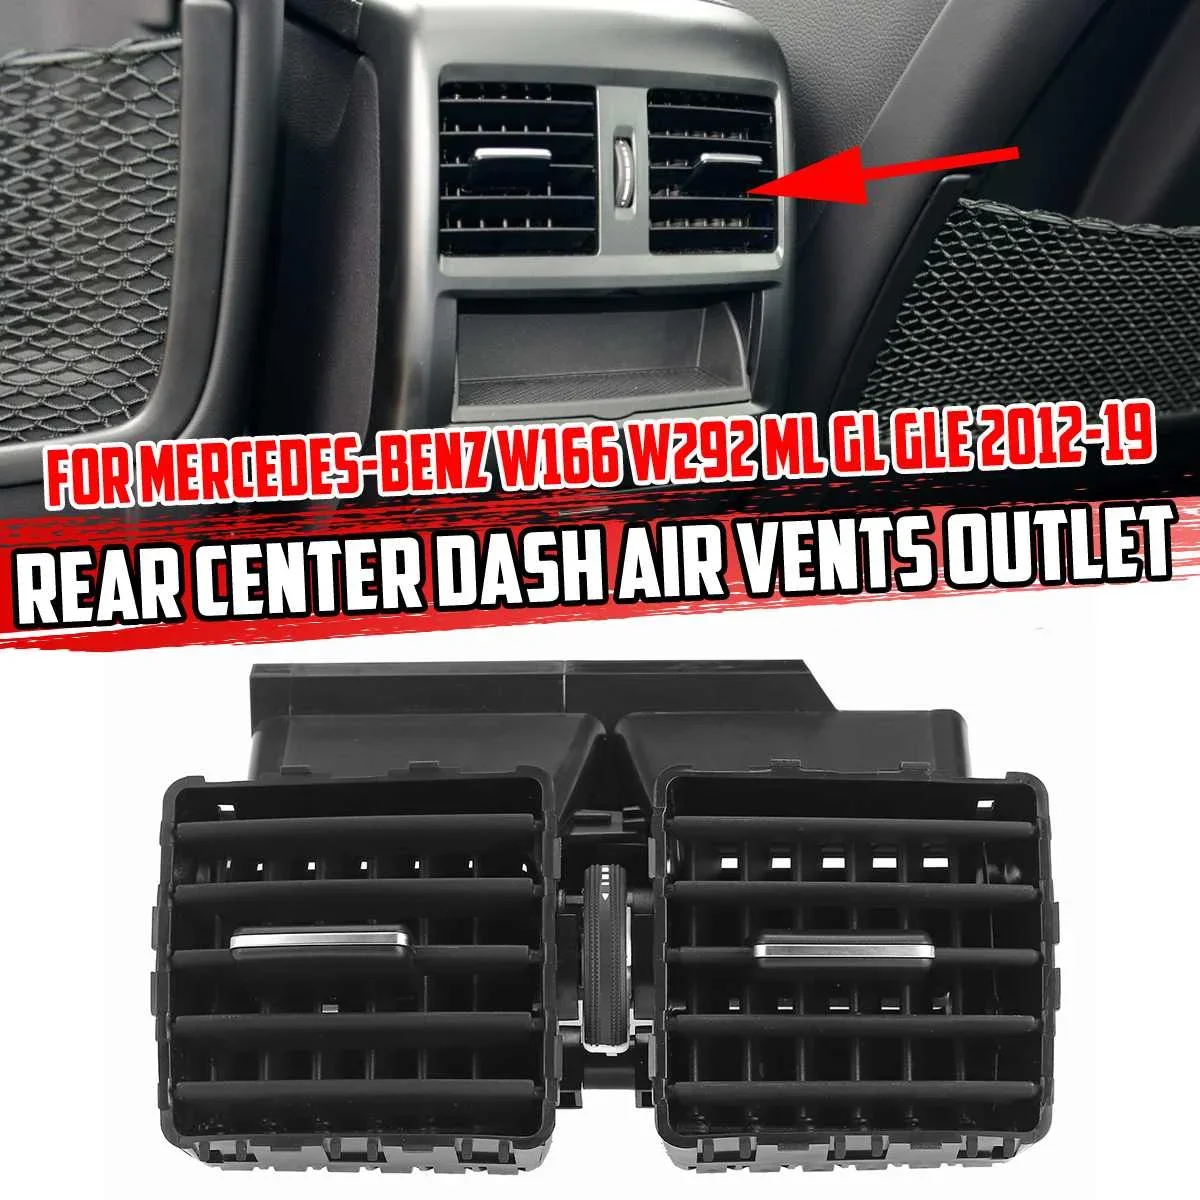 

ABS Car Rear Center Dash Air Outlet Vent Nozzles Grille Cover For Mercedes For Benz W166 W292 ML GL GLE 2012-2019 16683005542A17